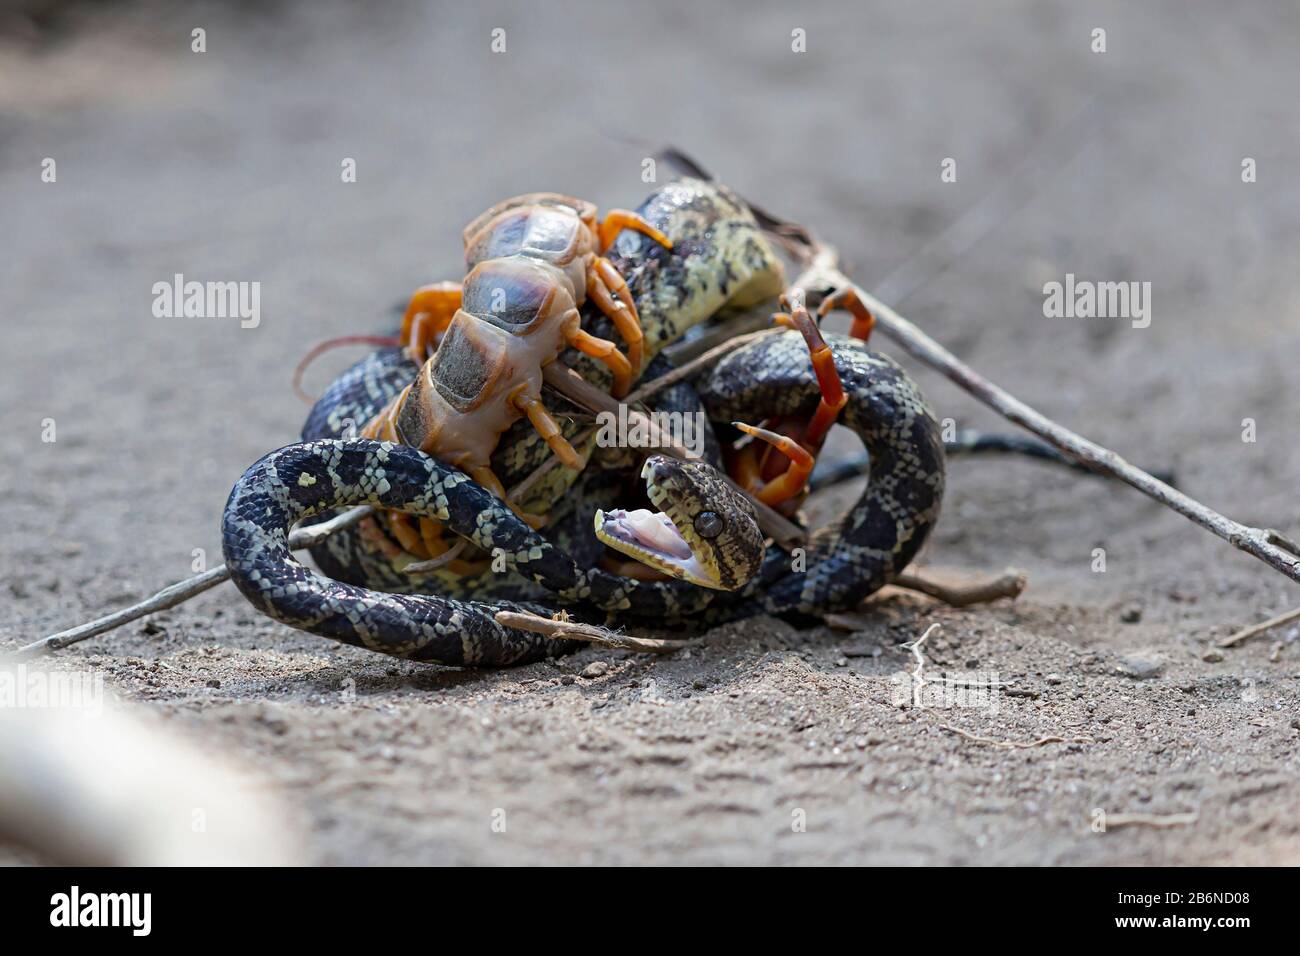 A Ringed Tree Boa (Corallus annulatus) is struggeling for Life with a Giant Centipede Stock Photo